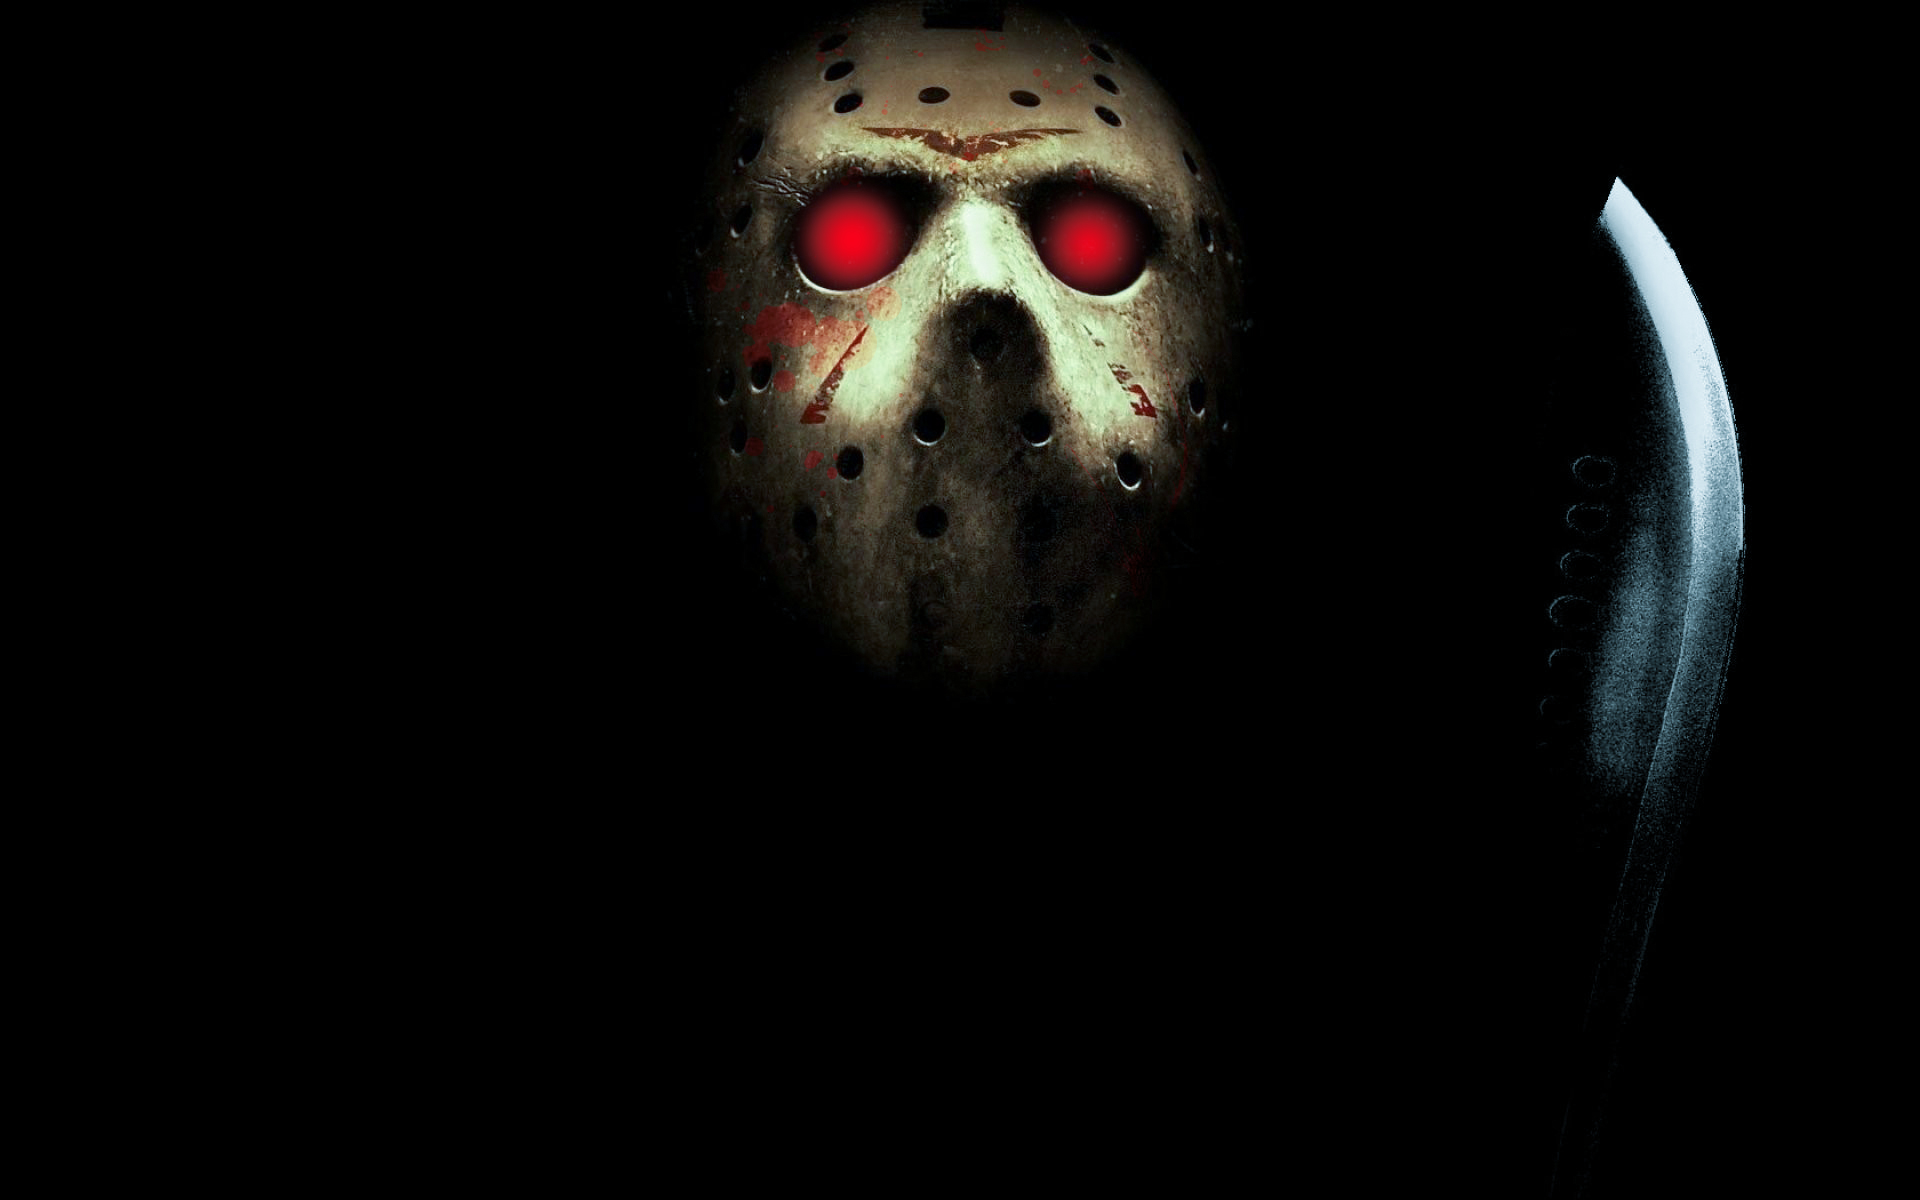 movie, friday the 13th (2009), friday the 13th, jason voorhees, machete, mask, red eyes High Definition image